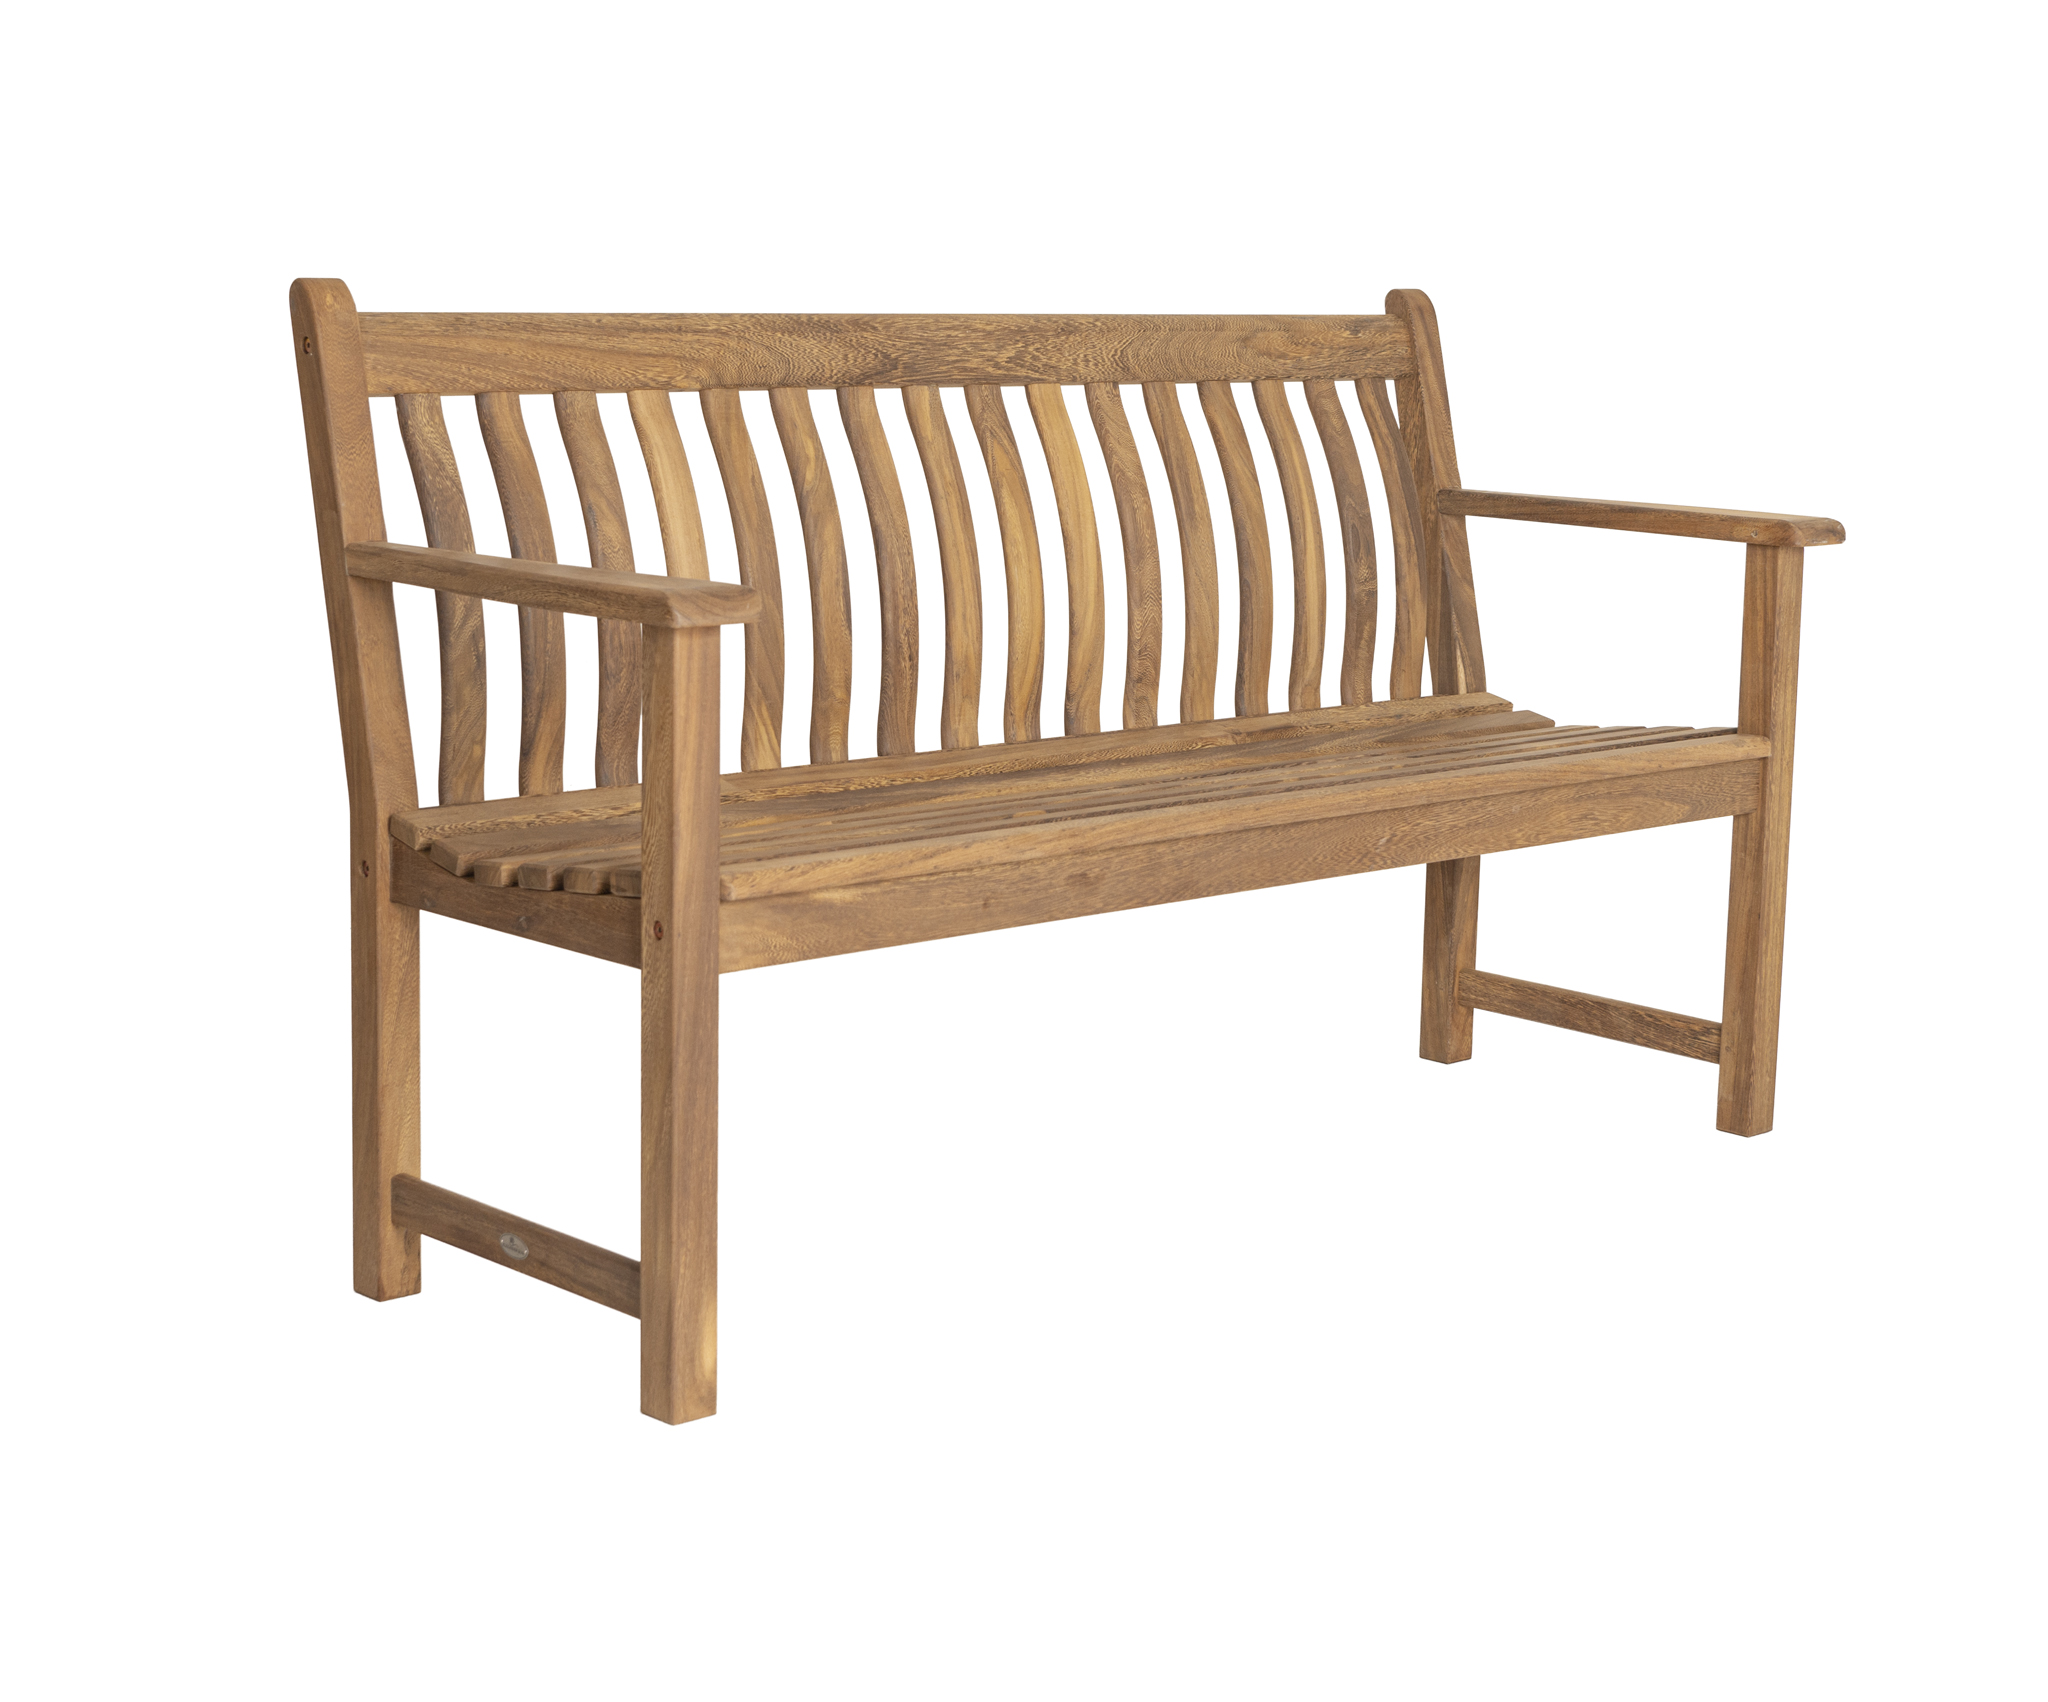 Albany Broadfield Bench 5ft